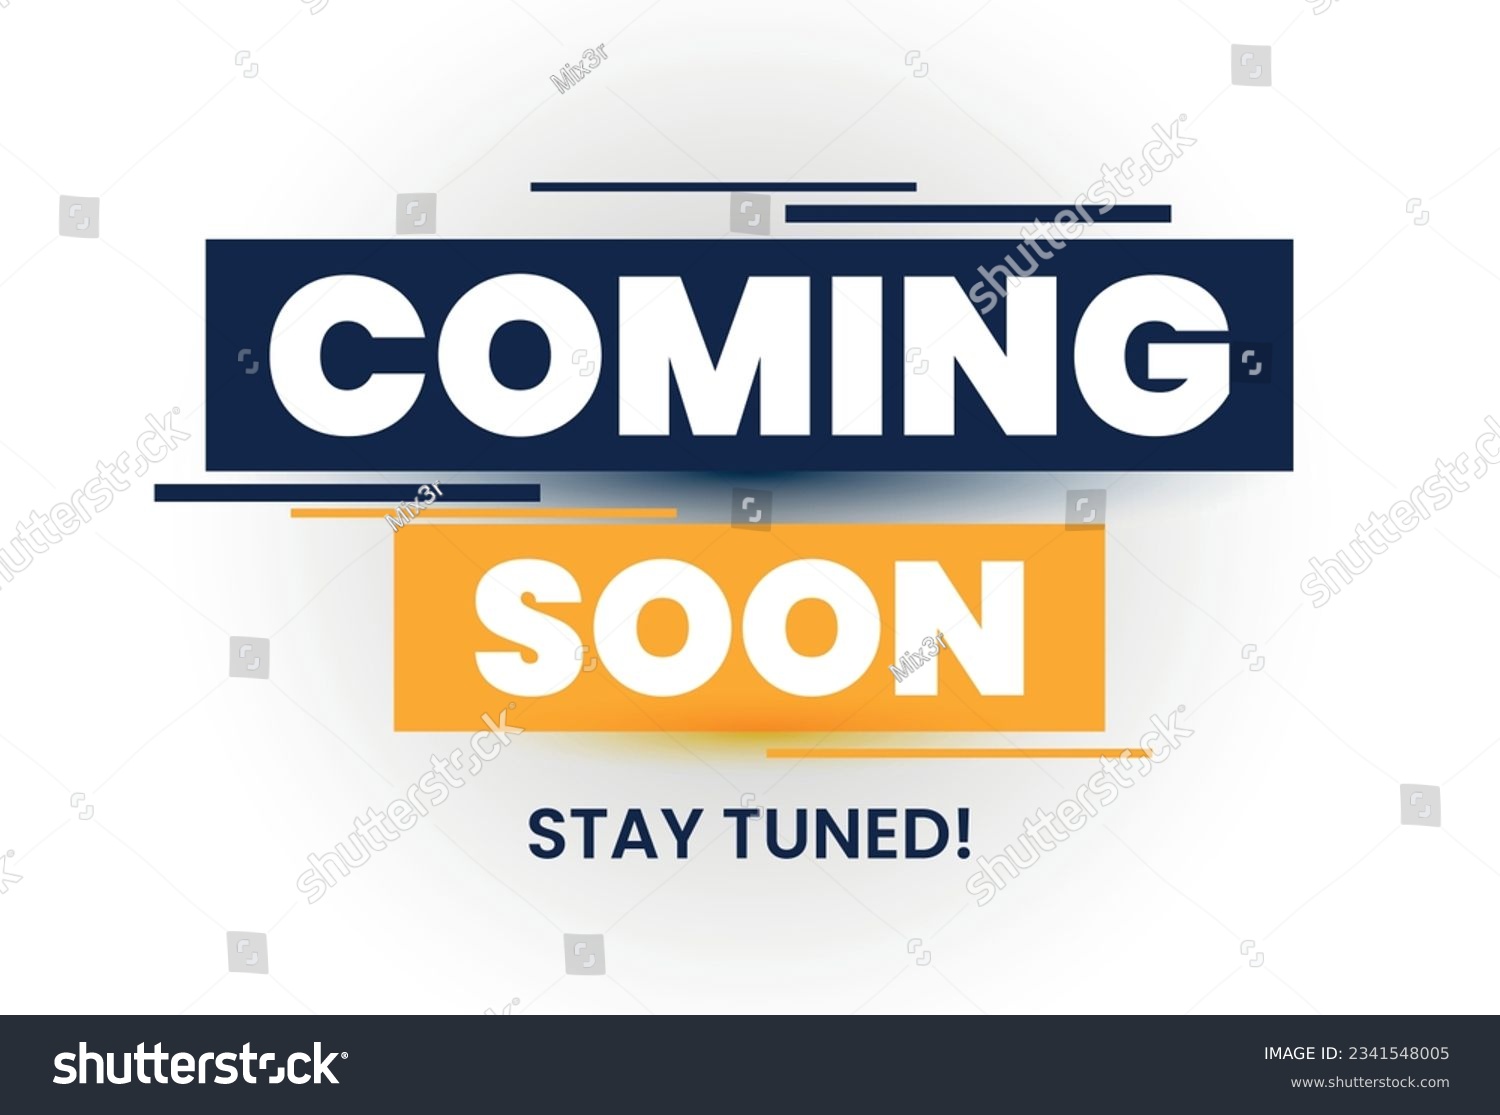 SVG of modern coming soon poster with stay tuned message svg